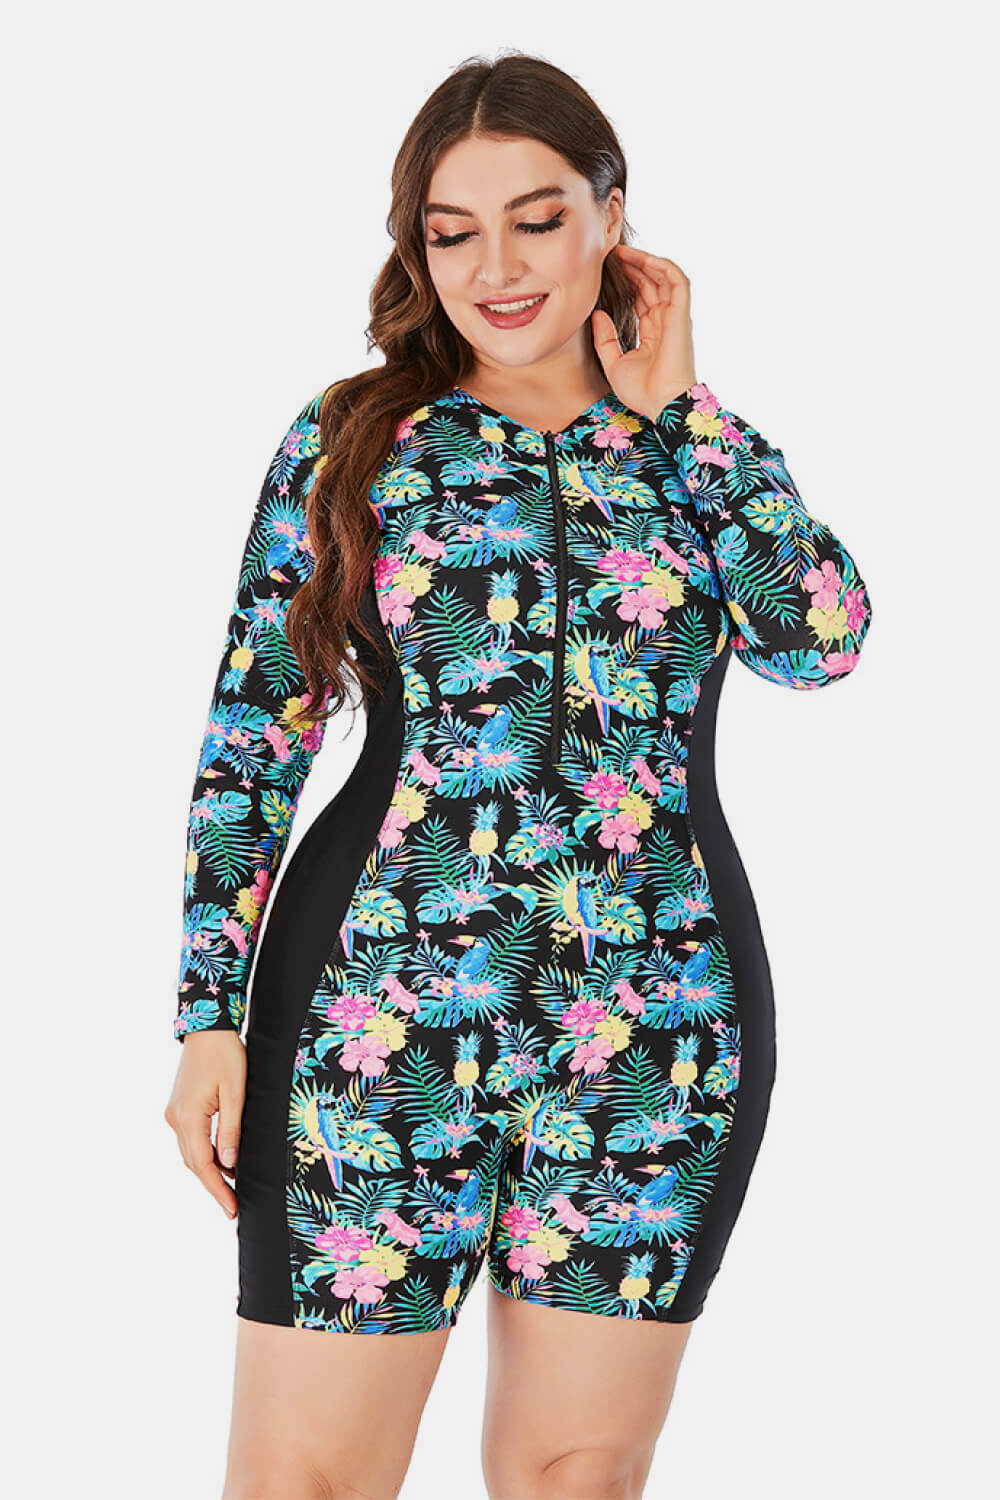 Plus Size Floral Zip Up Long Sleeve Short Wetsuit - Swimwear One-Pieces - FITGGINS